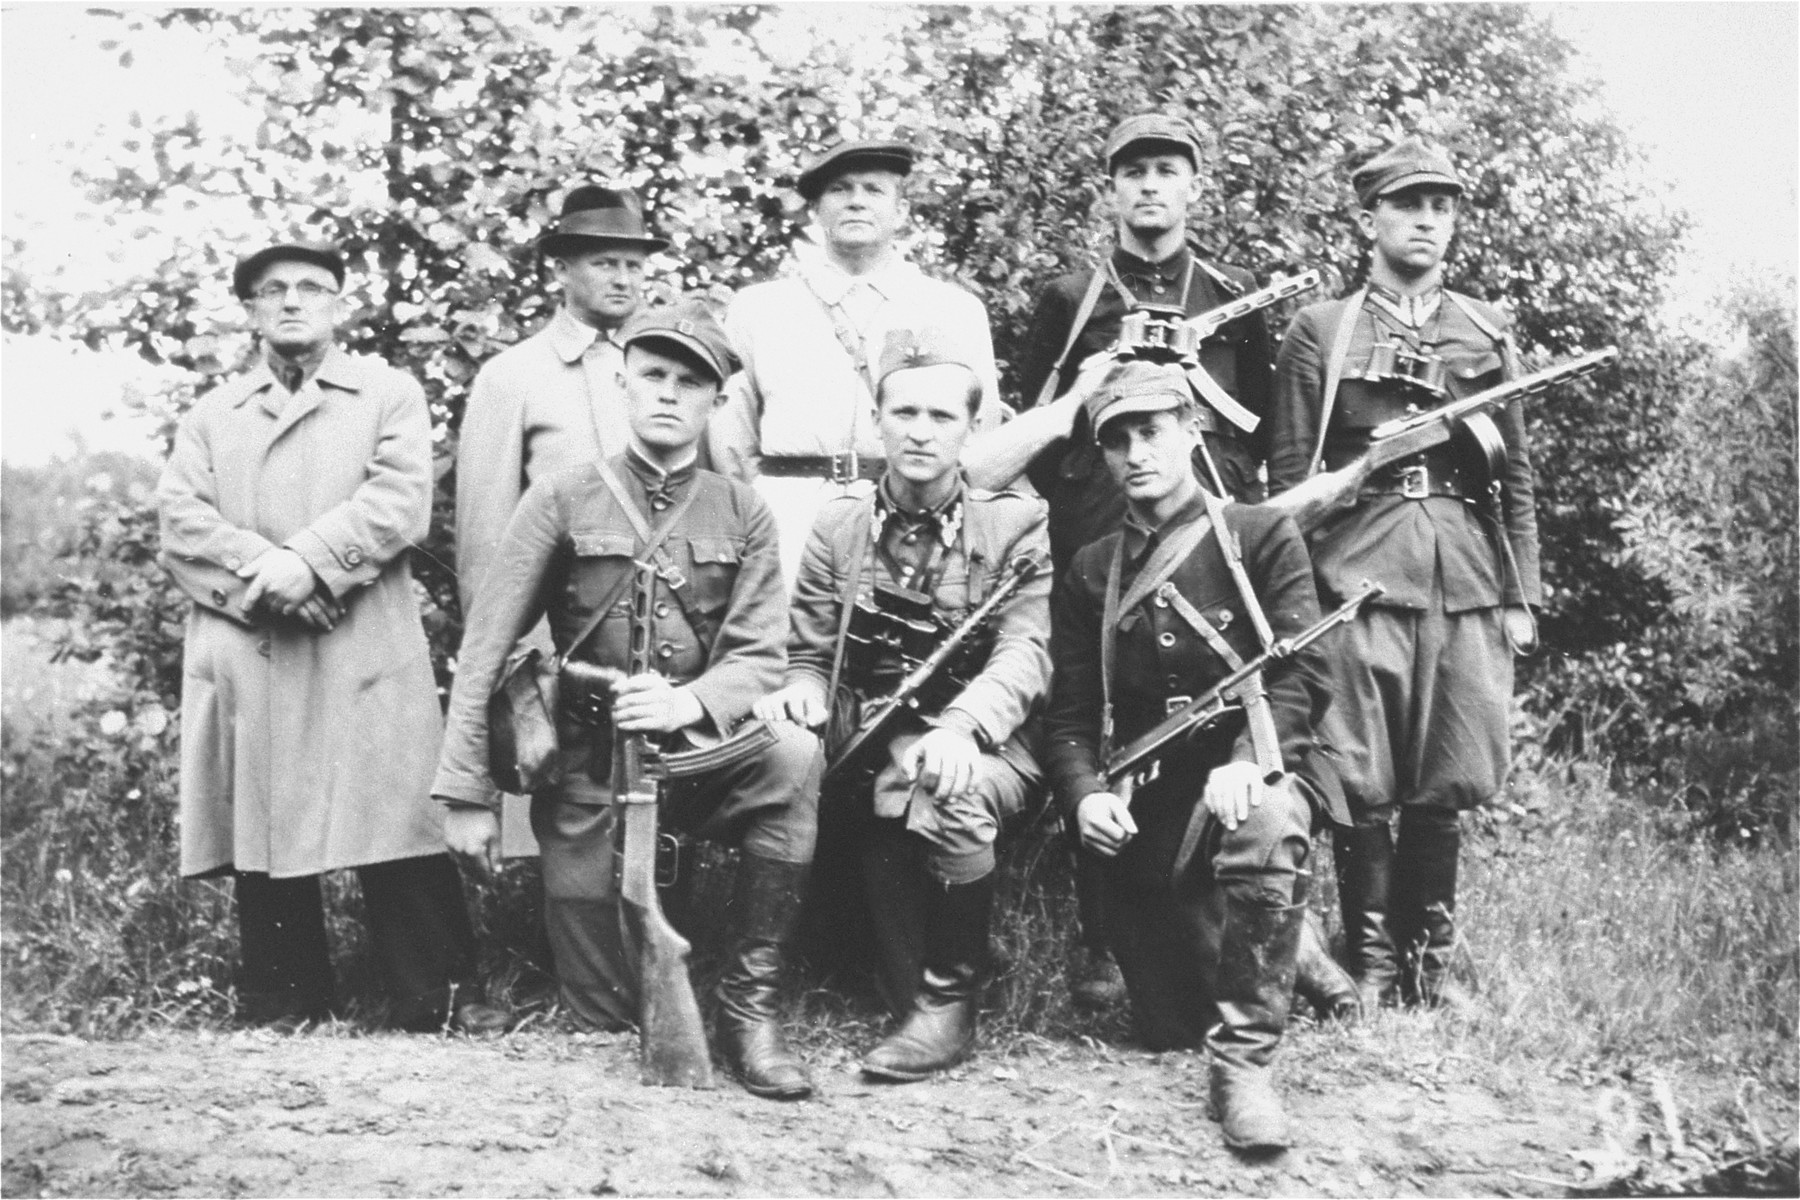 General Michael (Rola) Zymierski (top row, center), commander of the Polish communist Armia Ludowa, poses with a partisan unit in the Parczew Forest.  The partisan unit includes the Jewish physician, Michael Temchin (bottom right).